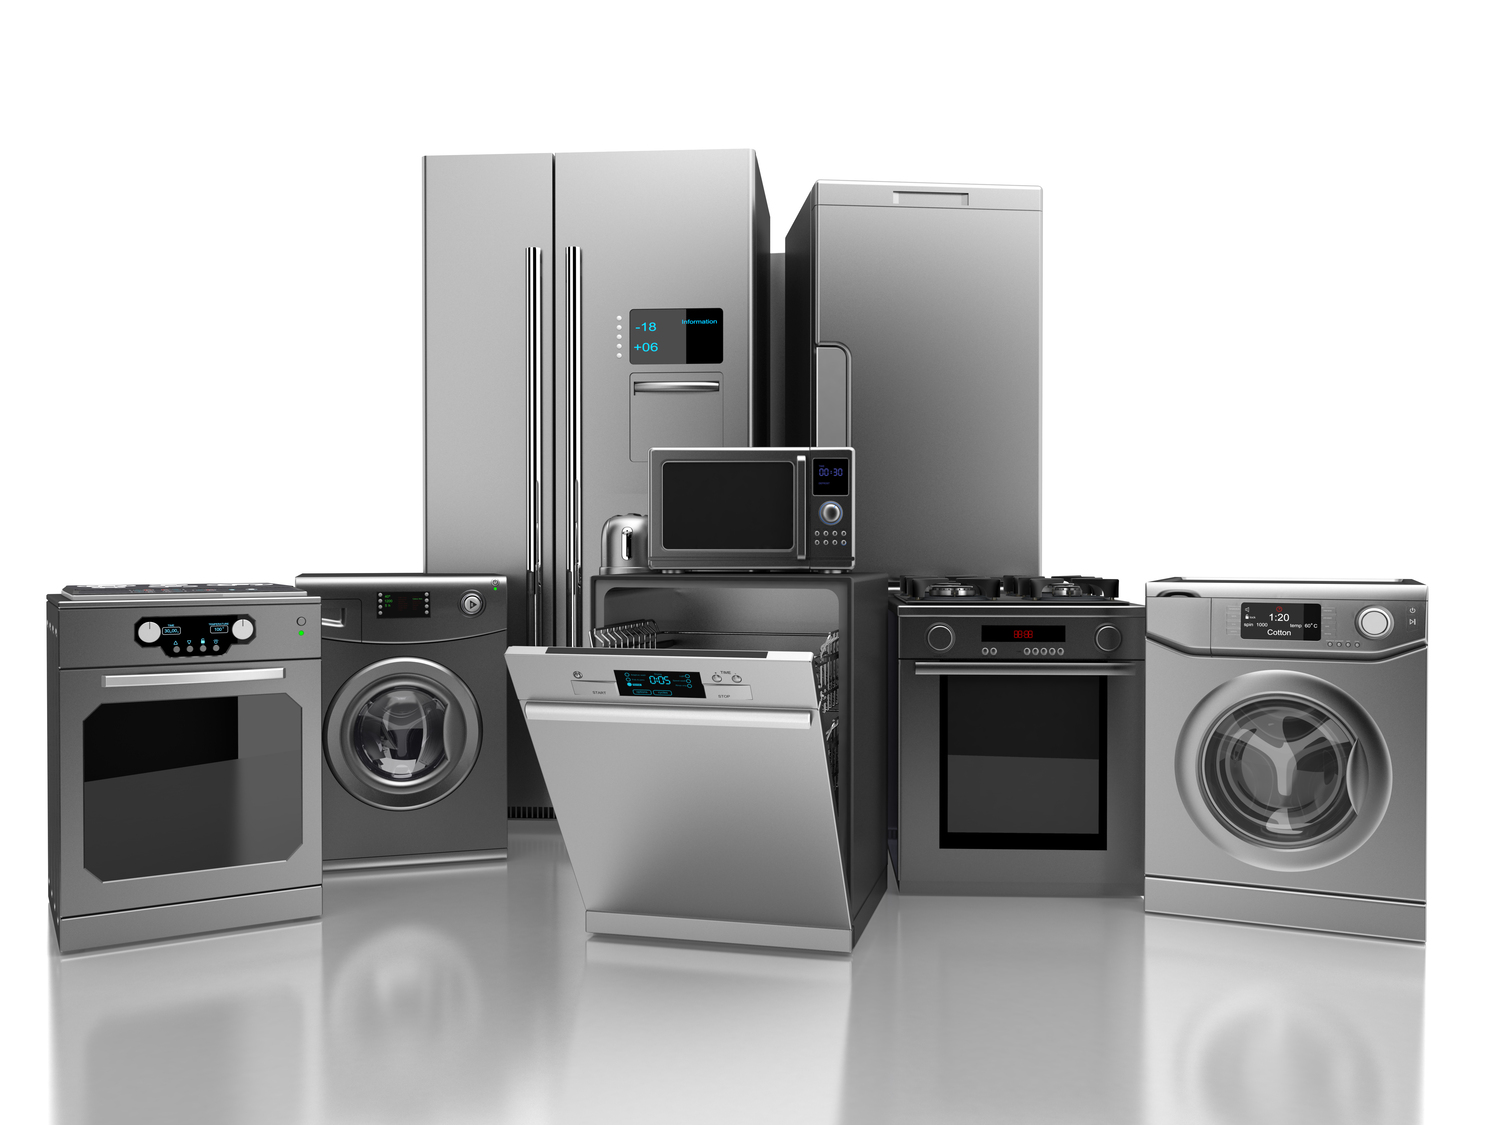 A photo of multiple home appliances that can be covered under a home warranty